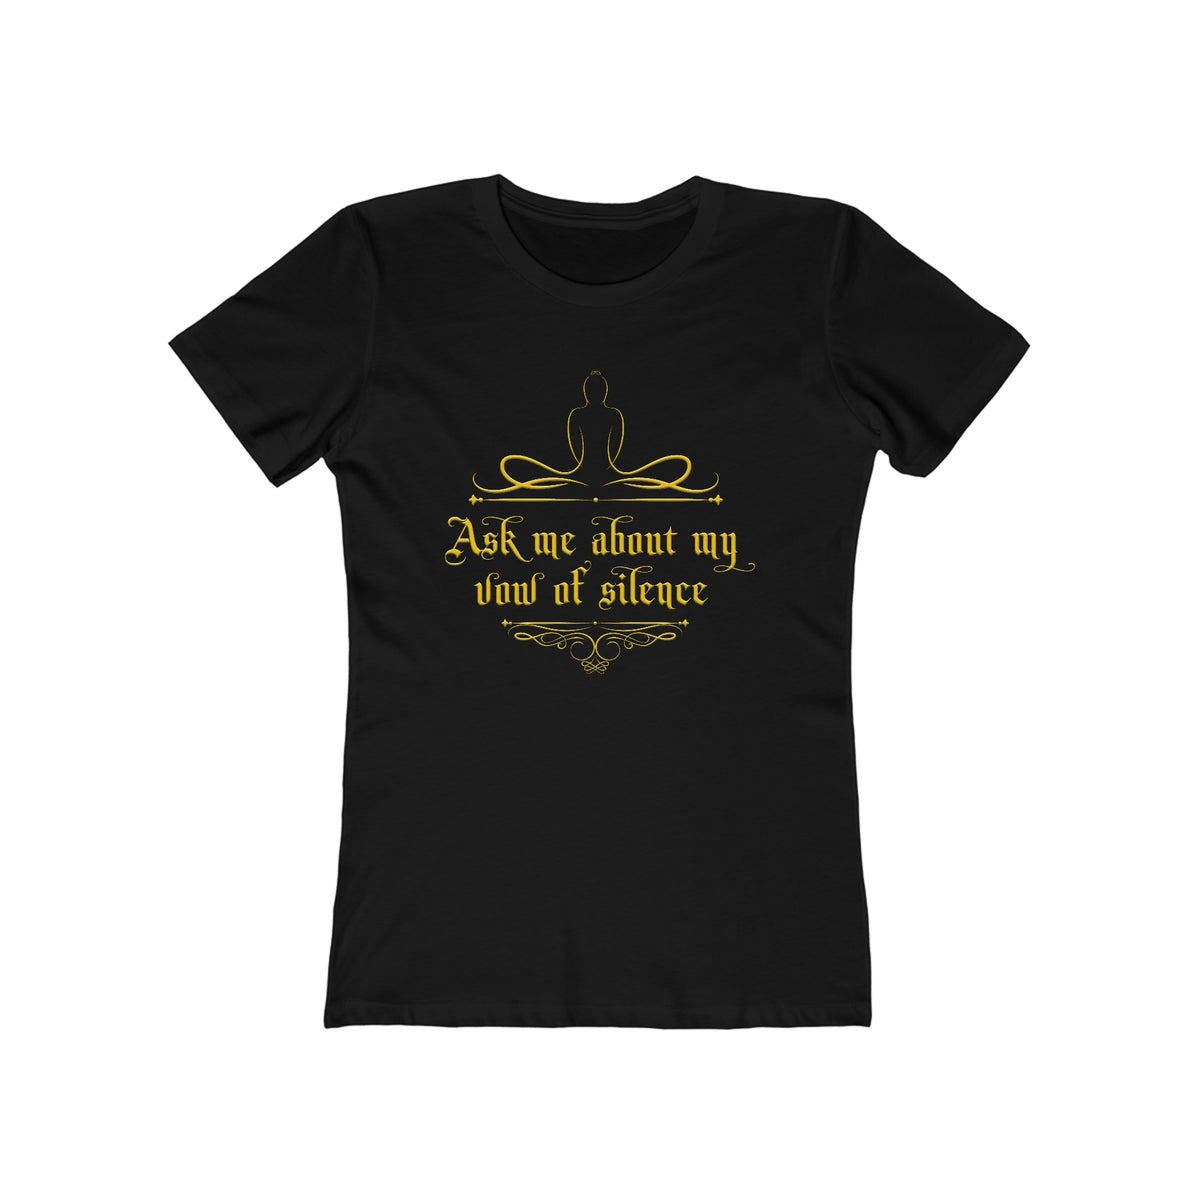 Ask Me About My Vow Of Silence - Women’s T-Shirt